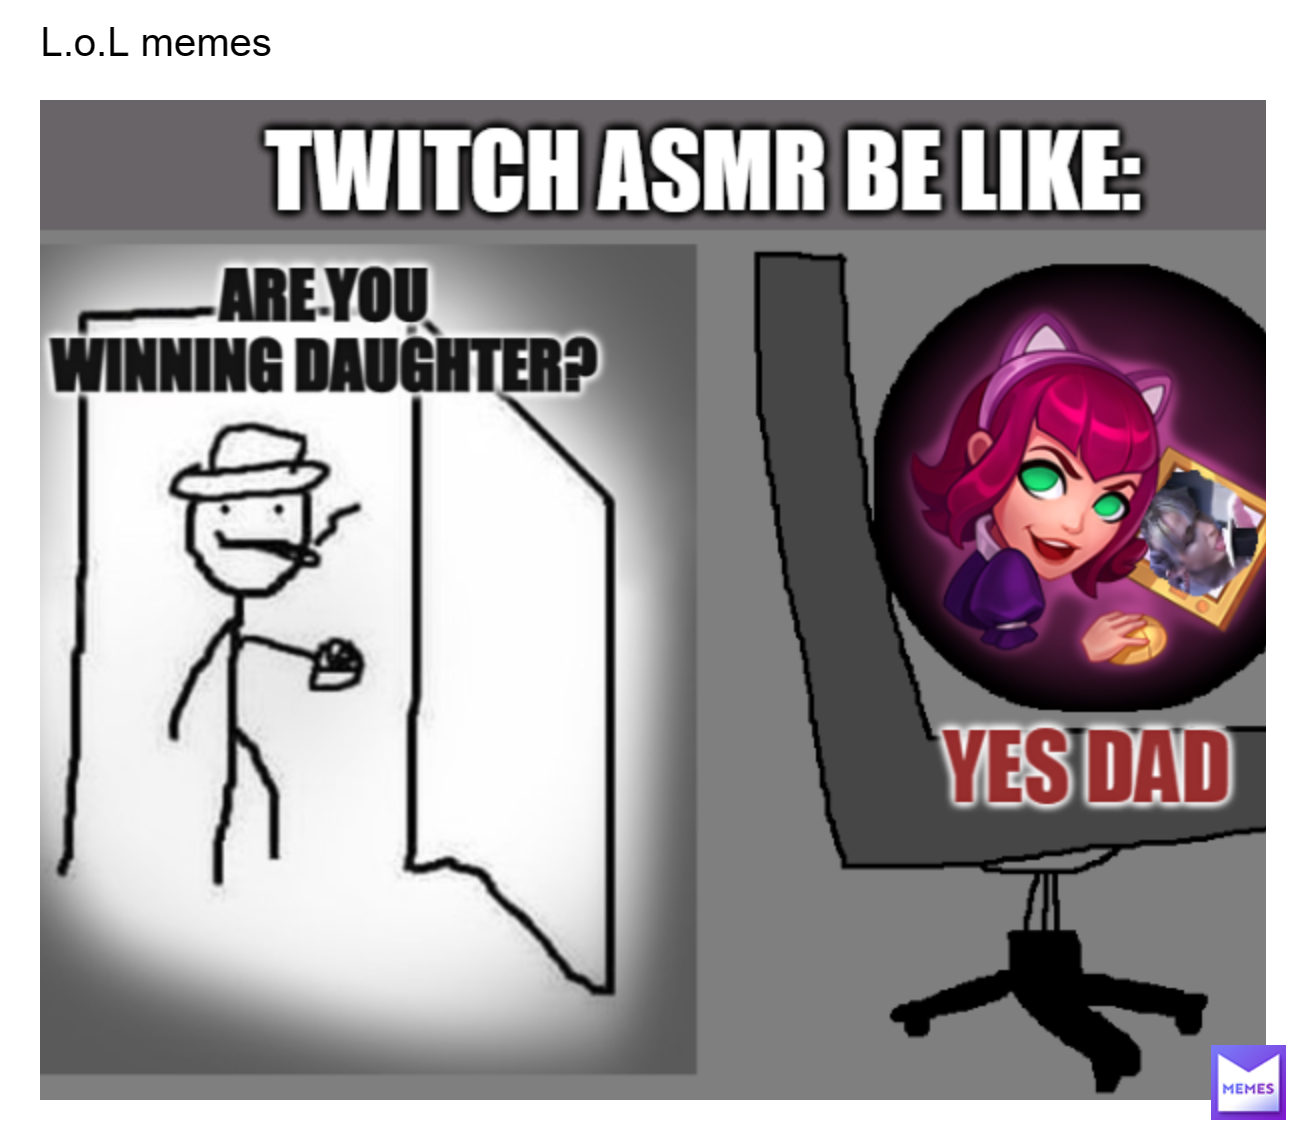 What app is that? #leagueoflegends #gaming #twitch #lol